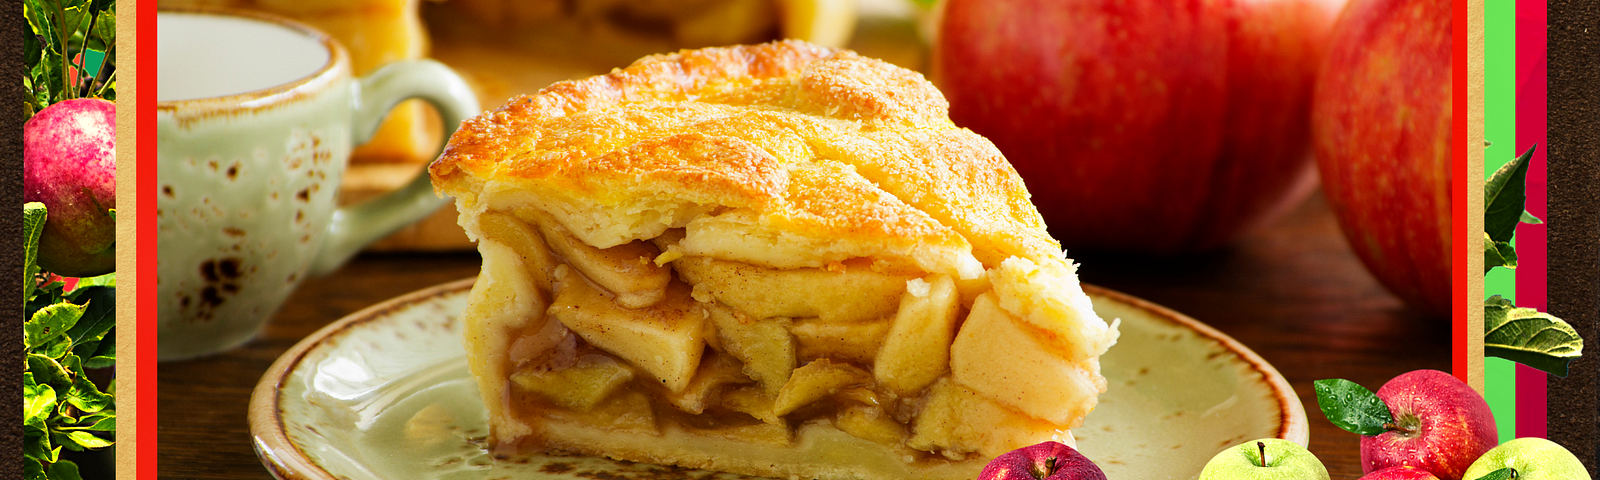 Slice of apple pie on plate with whole apples in the corner